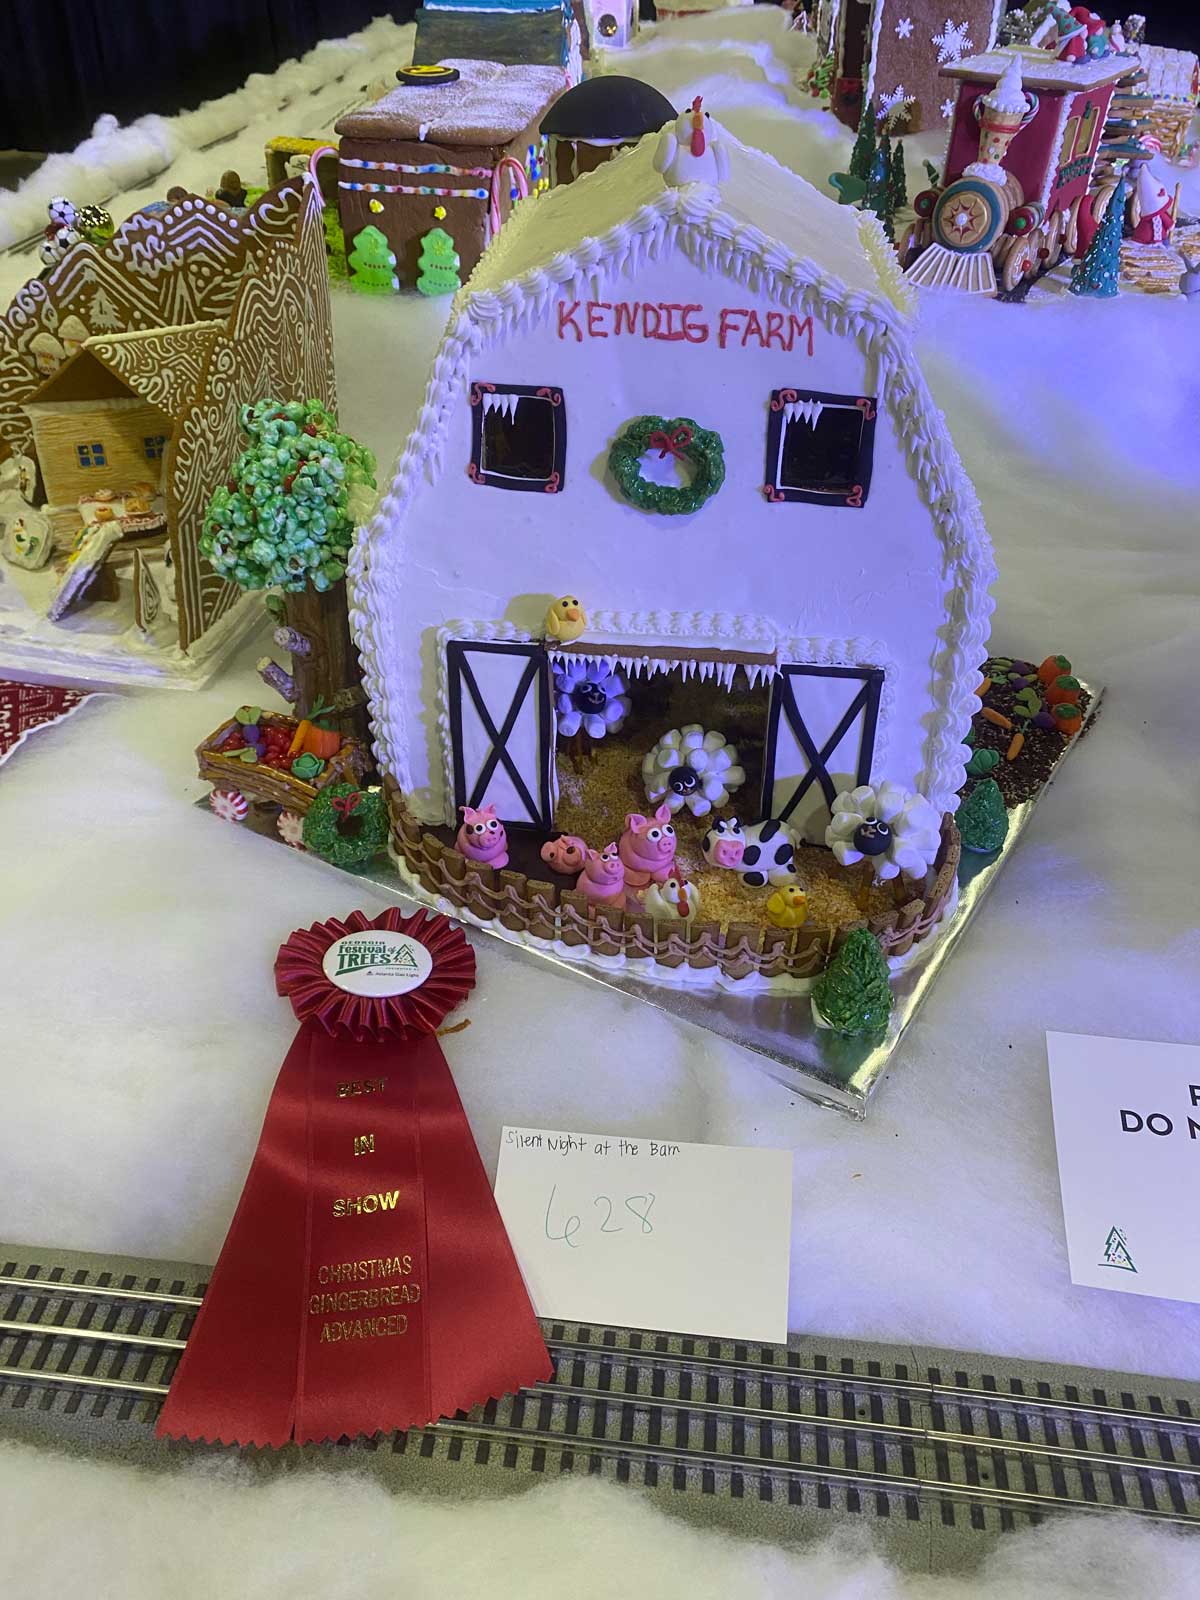 People's Choice - Gingerbread<br>“Silent Night at the Barn” by Kathleen McDaniel